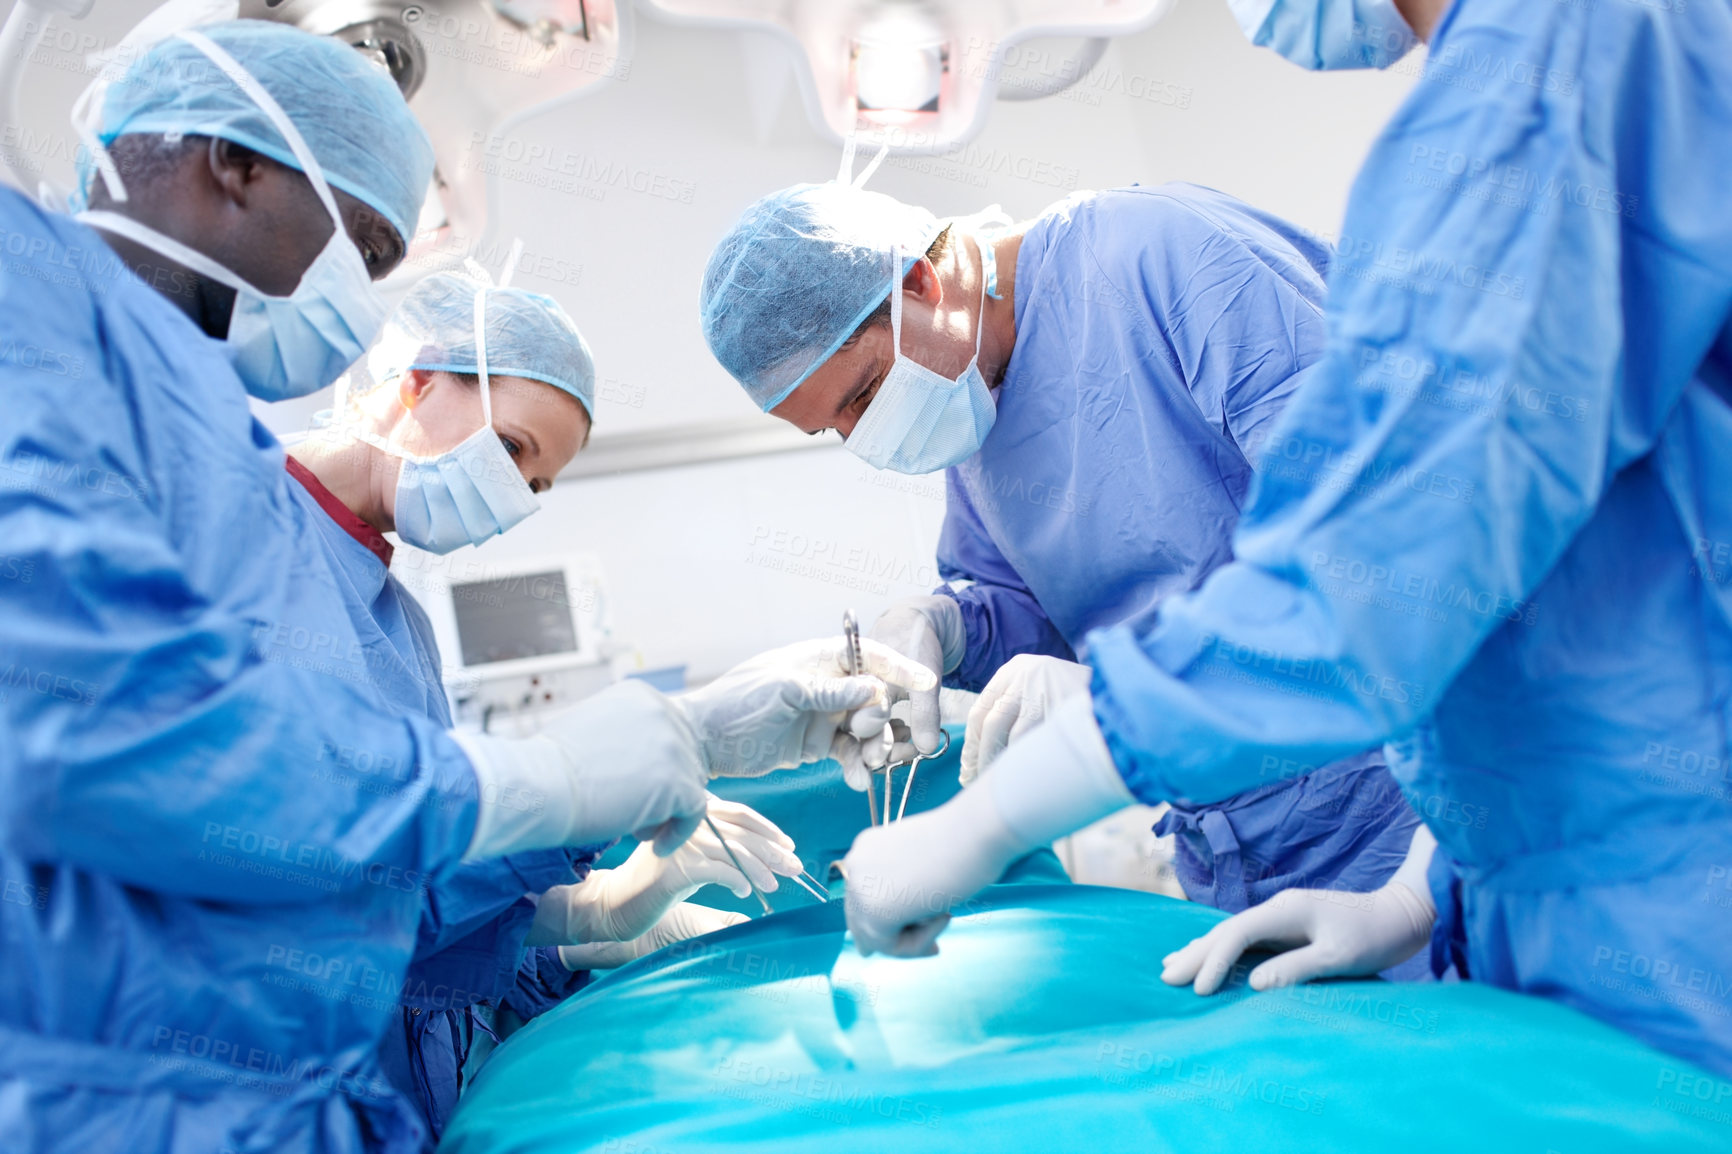 Buy stock photo Profile view of surgeons working together wearing scrubs in an operating room